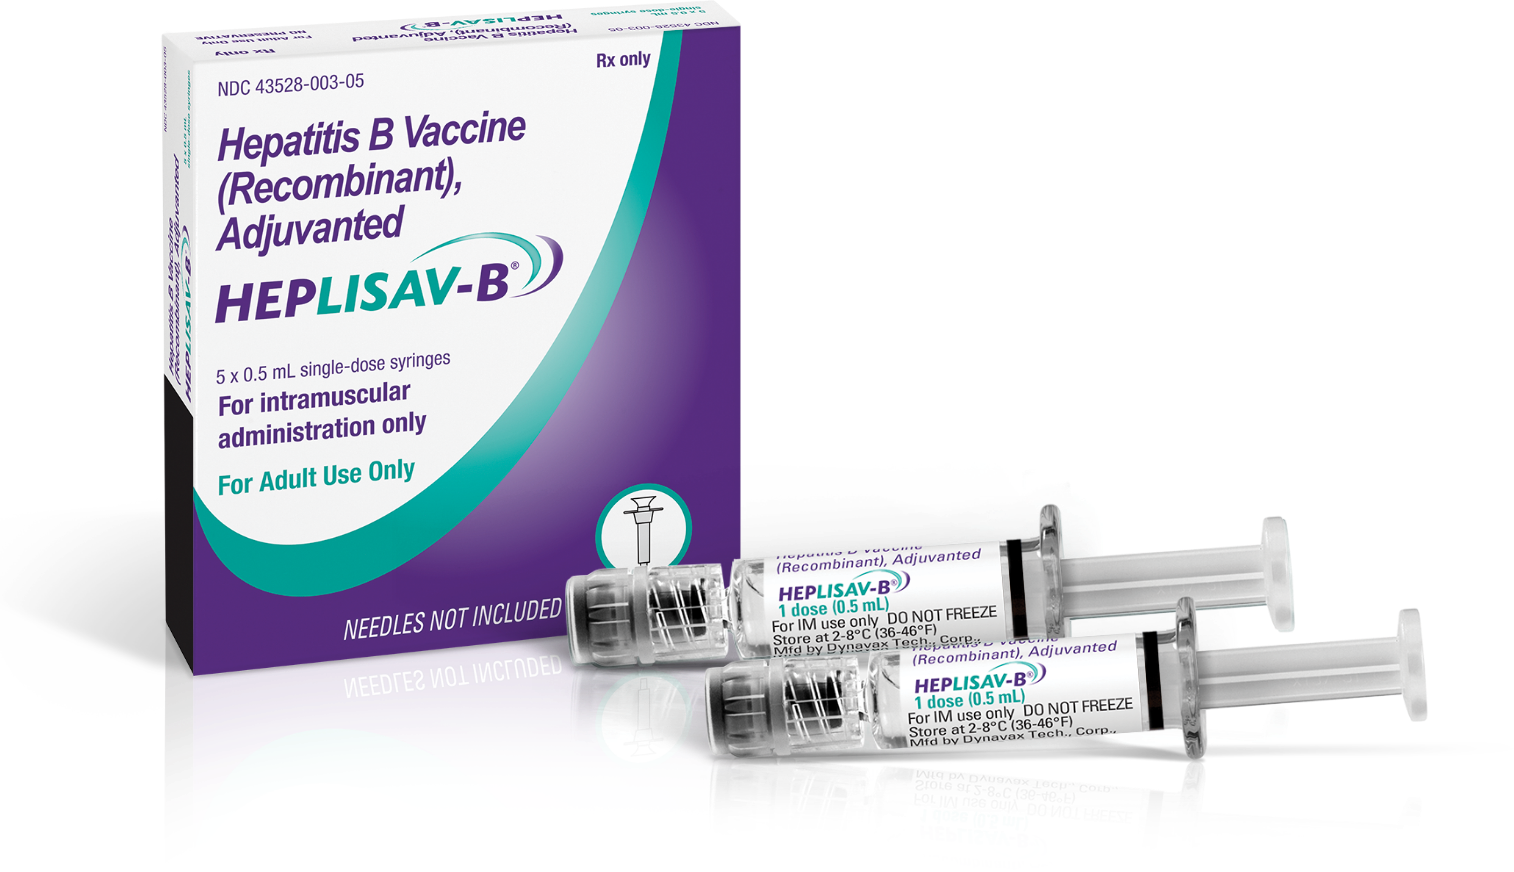 HEPLISAV-B comes in a package of 5 single-dose prefilled syringes